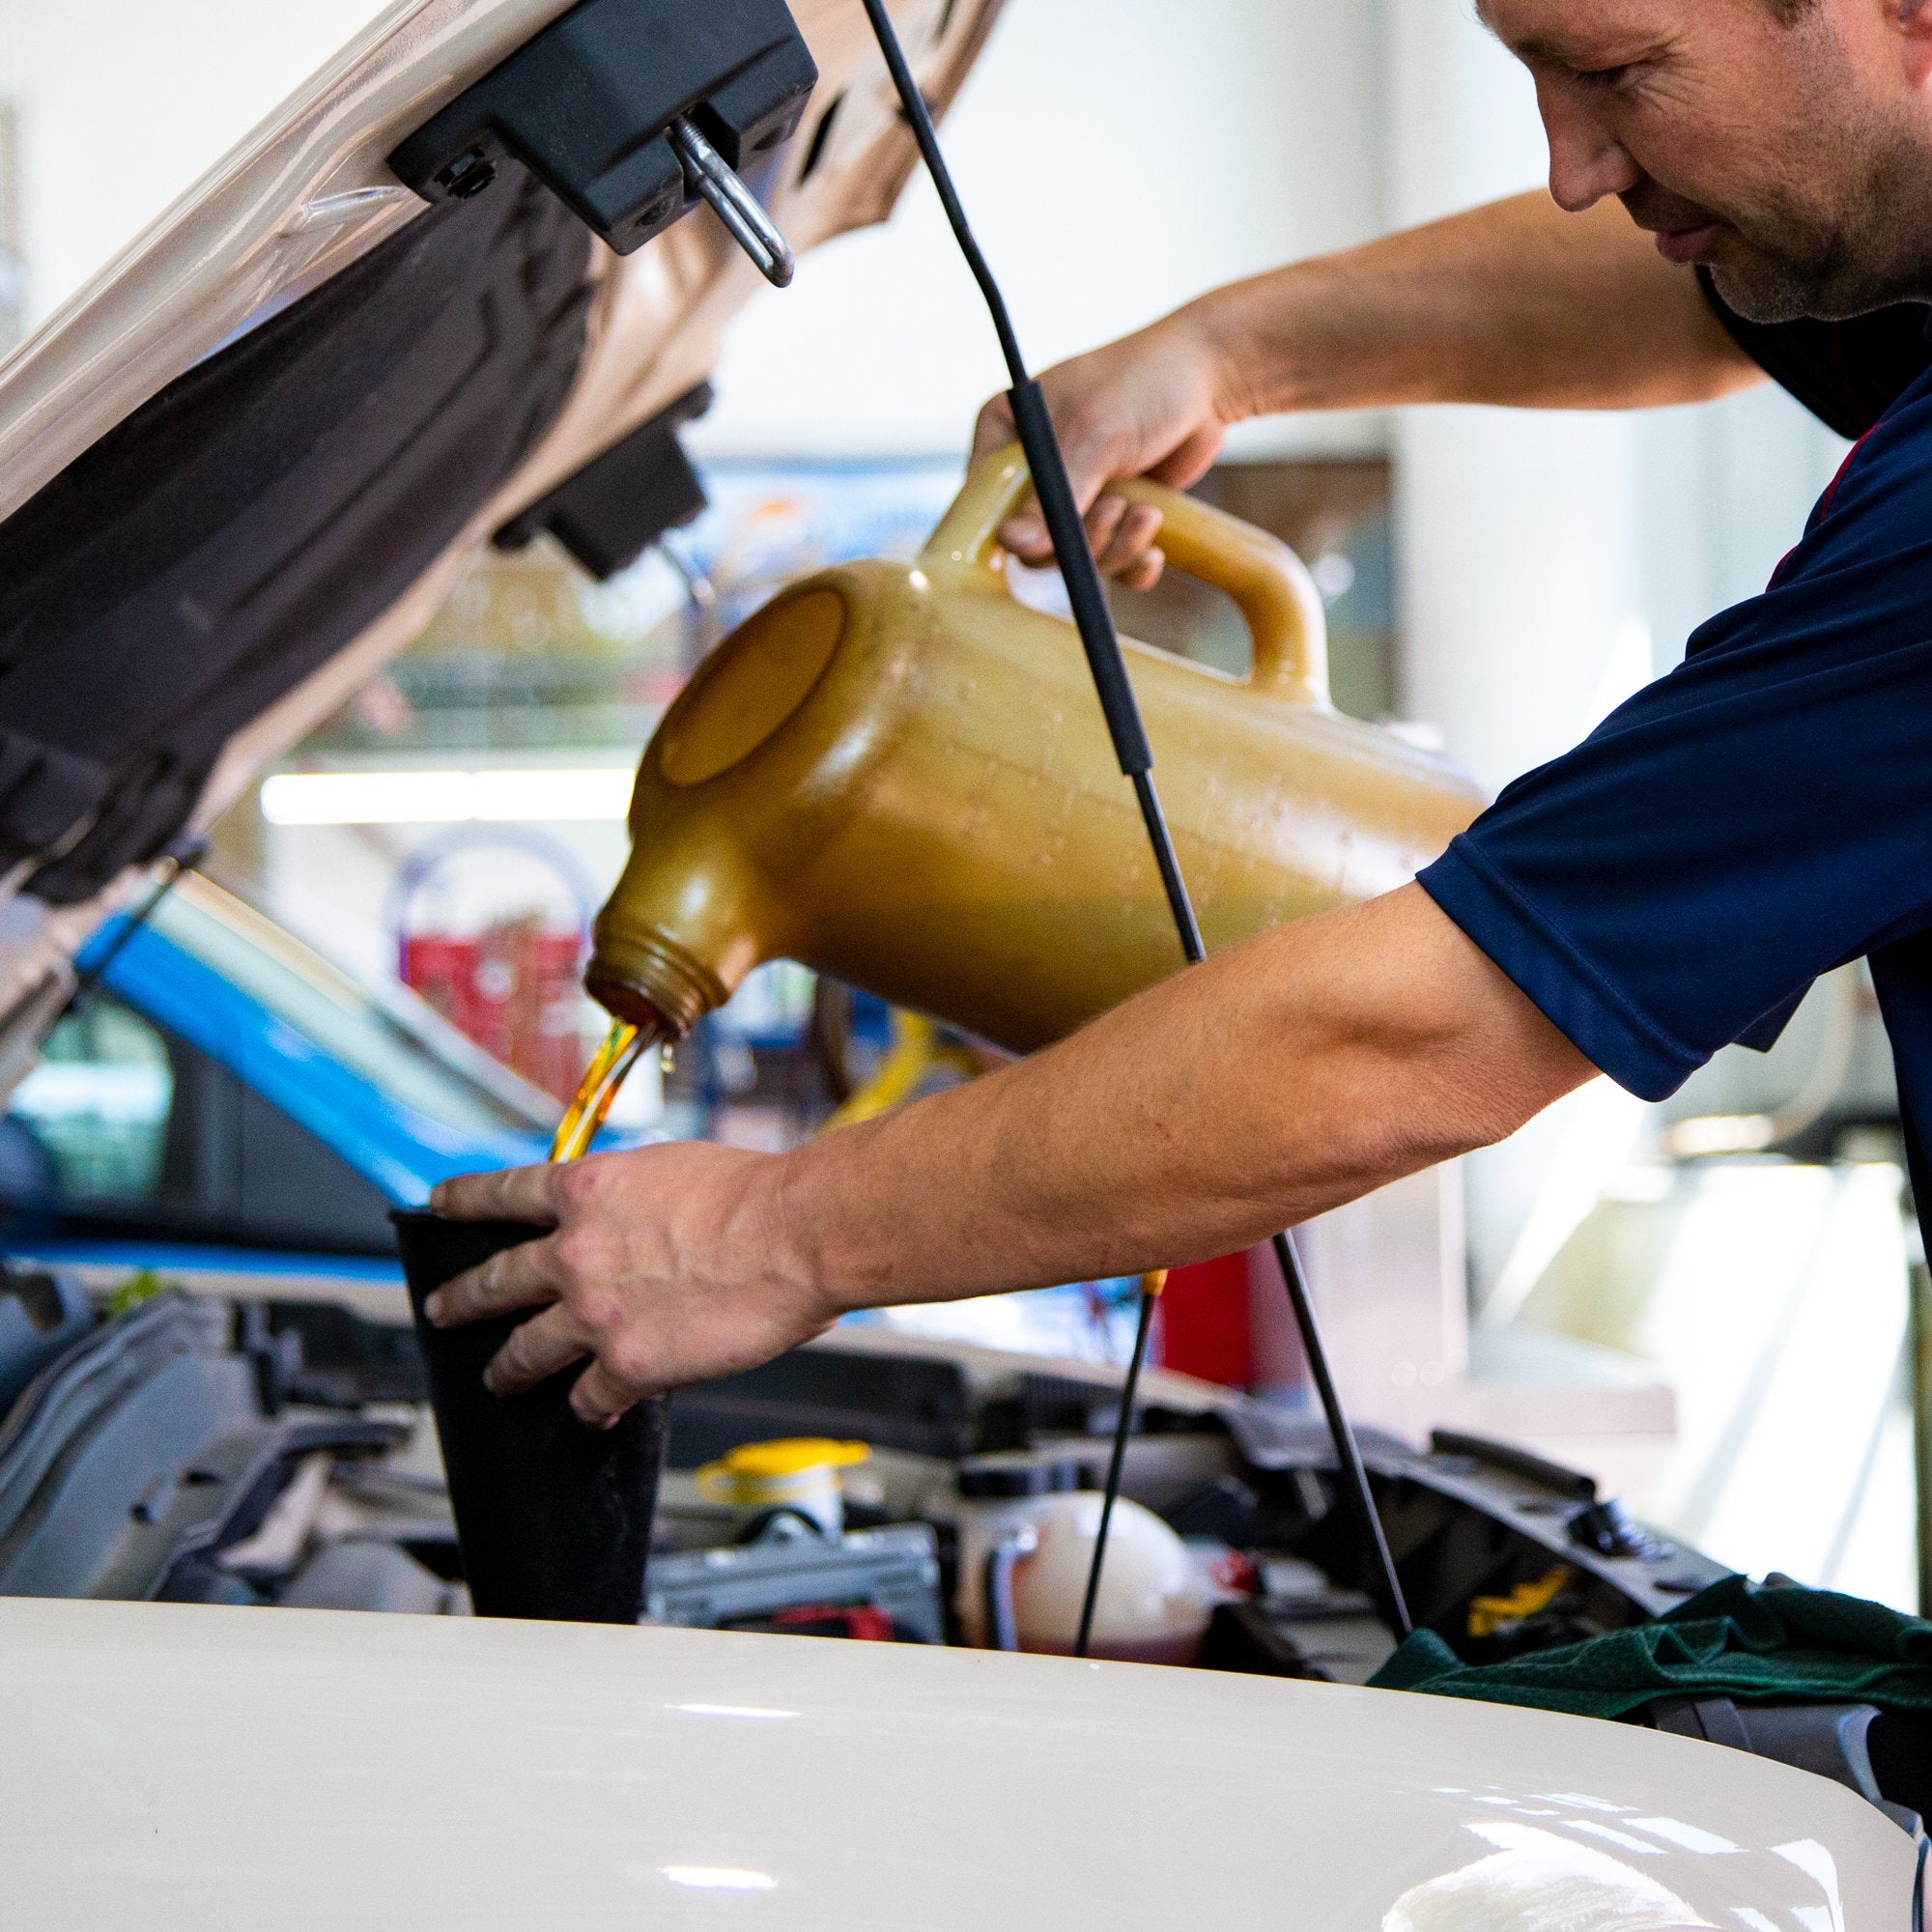 Delta Sonic’s highly trained Oil Change and Maintenance Techs give your car the care it needs to run safely and efficiently.